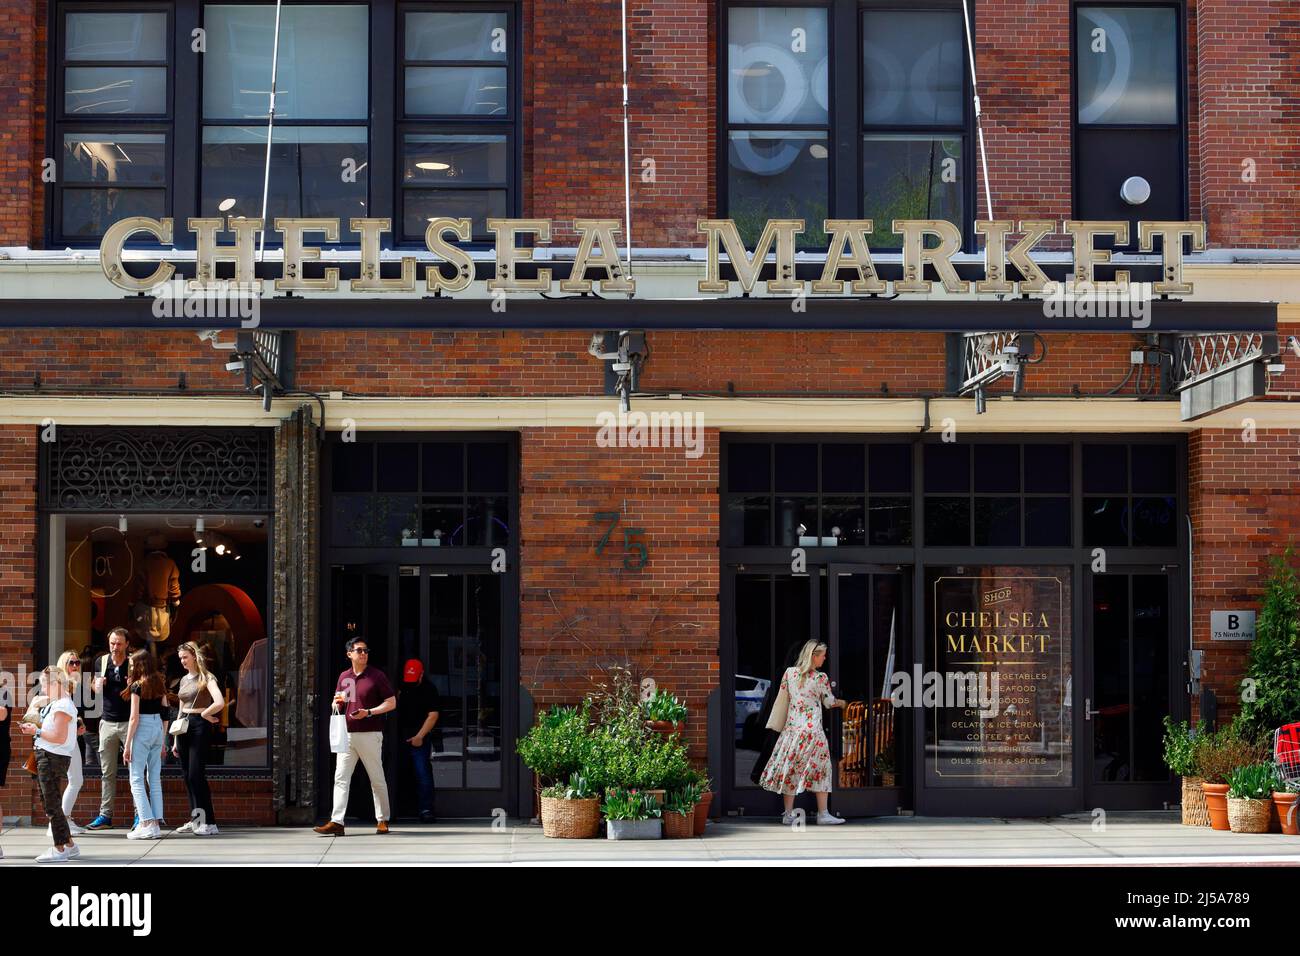 Chelsea Market, 75 Ninth Ave, New York, NY. exterior storefront of a gourmet food hall and Google office space in a former Nabisco factory. Stock Photo